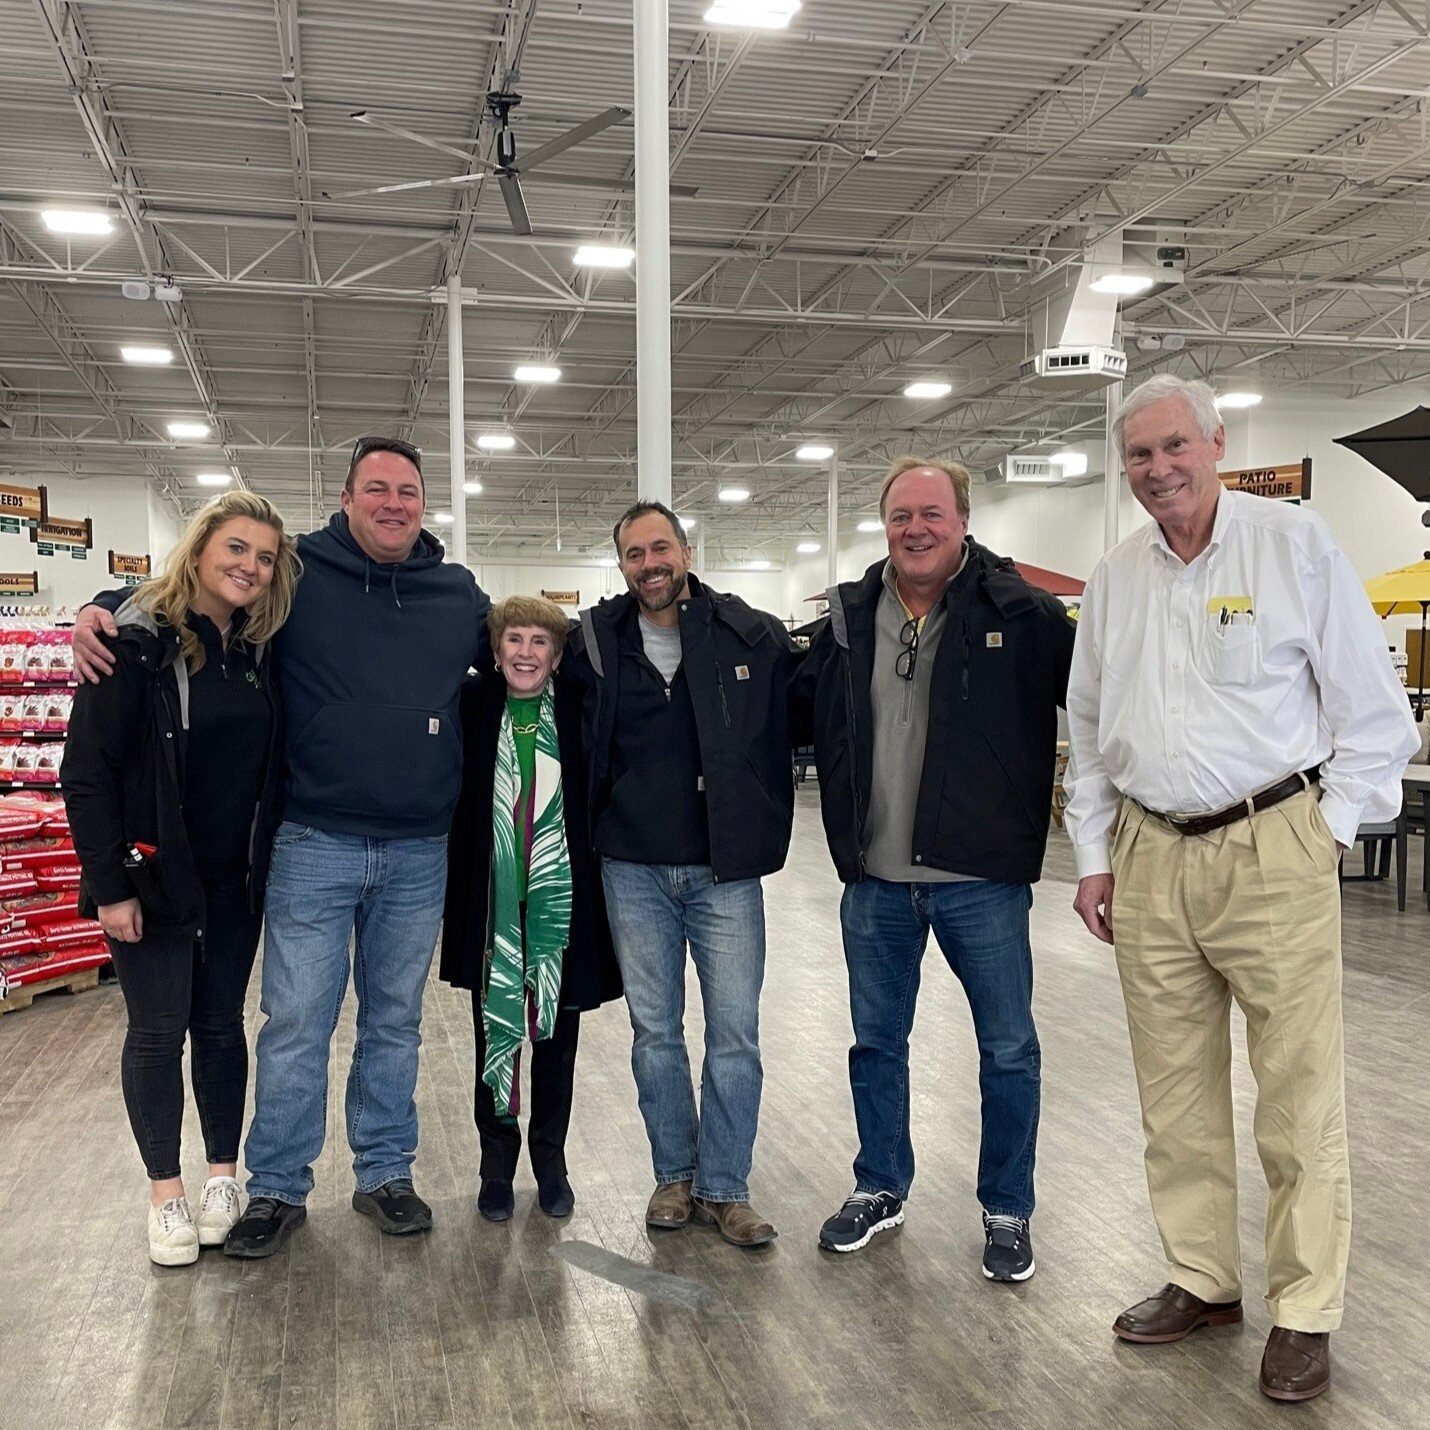 We are so excited to announce that Green Acres is now open at Cypress Waters!! Green Acres is a California-based company that is expanding to Texas.  We are so proud to have this high level of nursery at Cypress Waters. Go check them out!